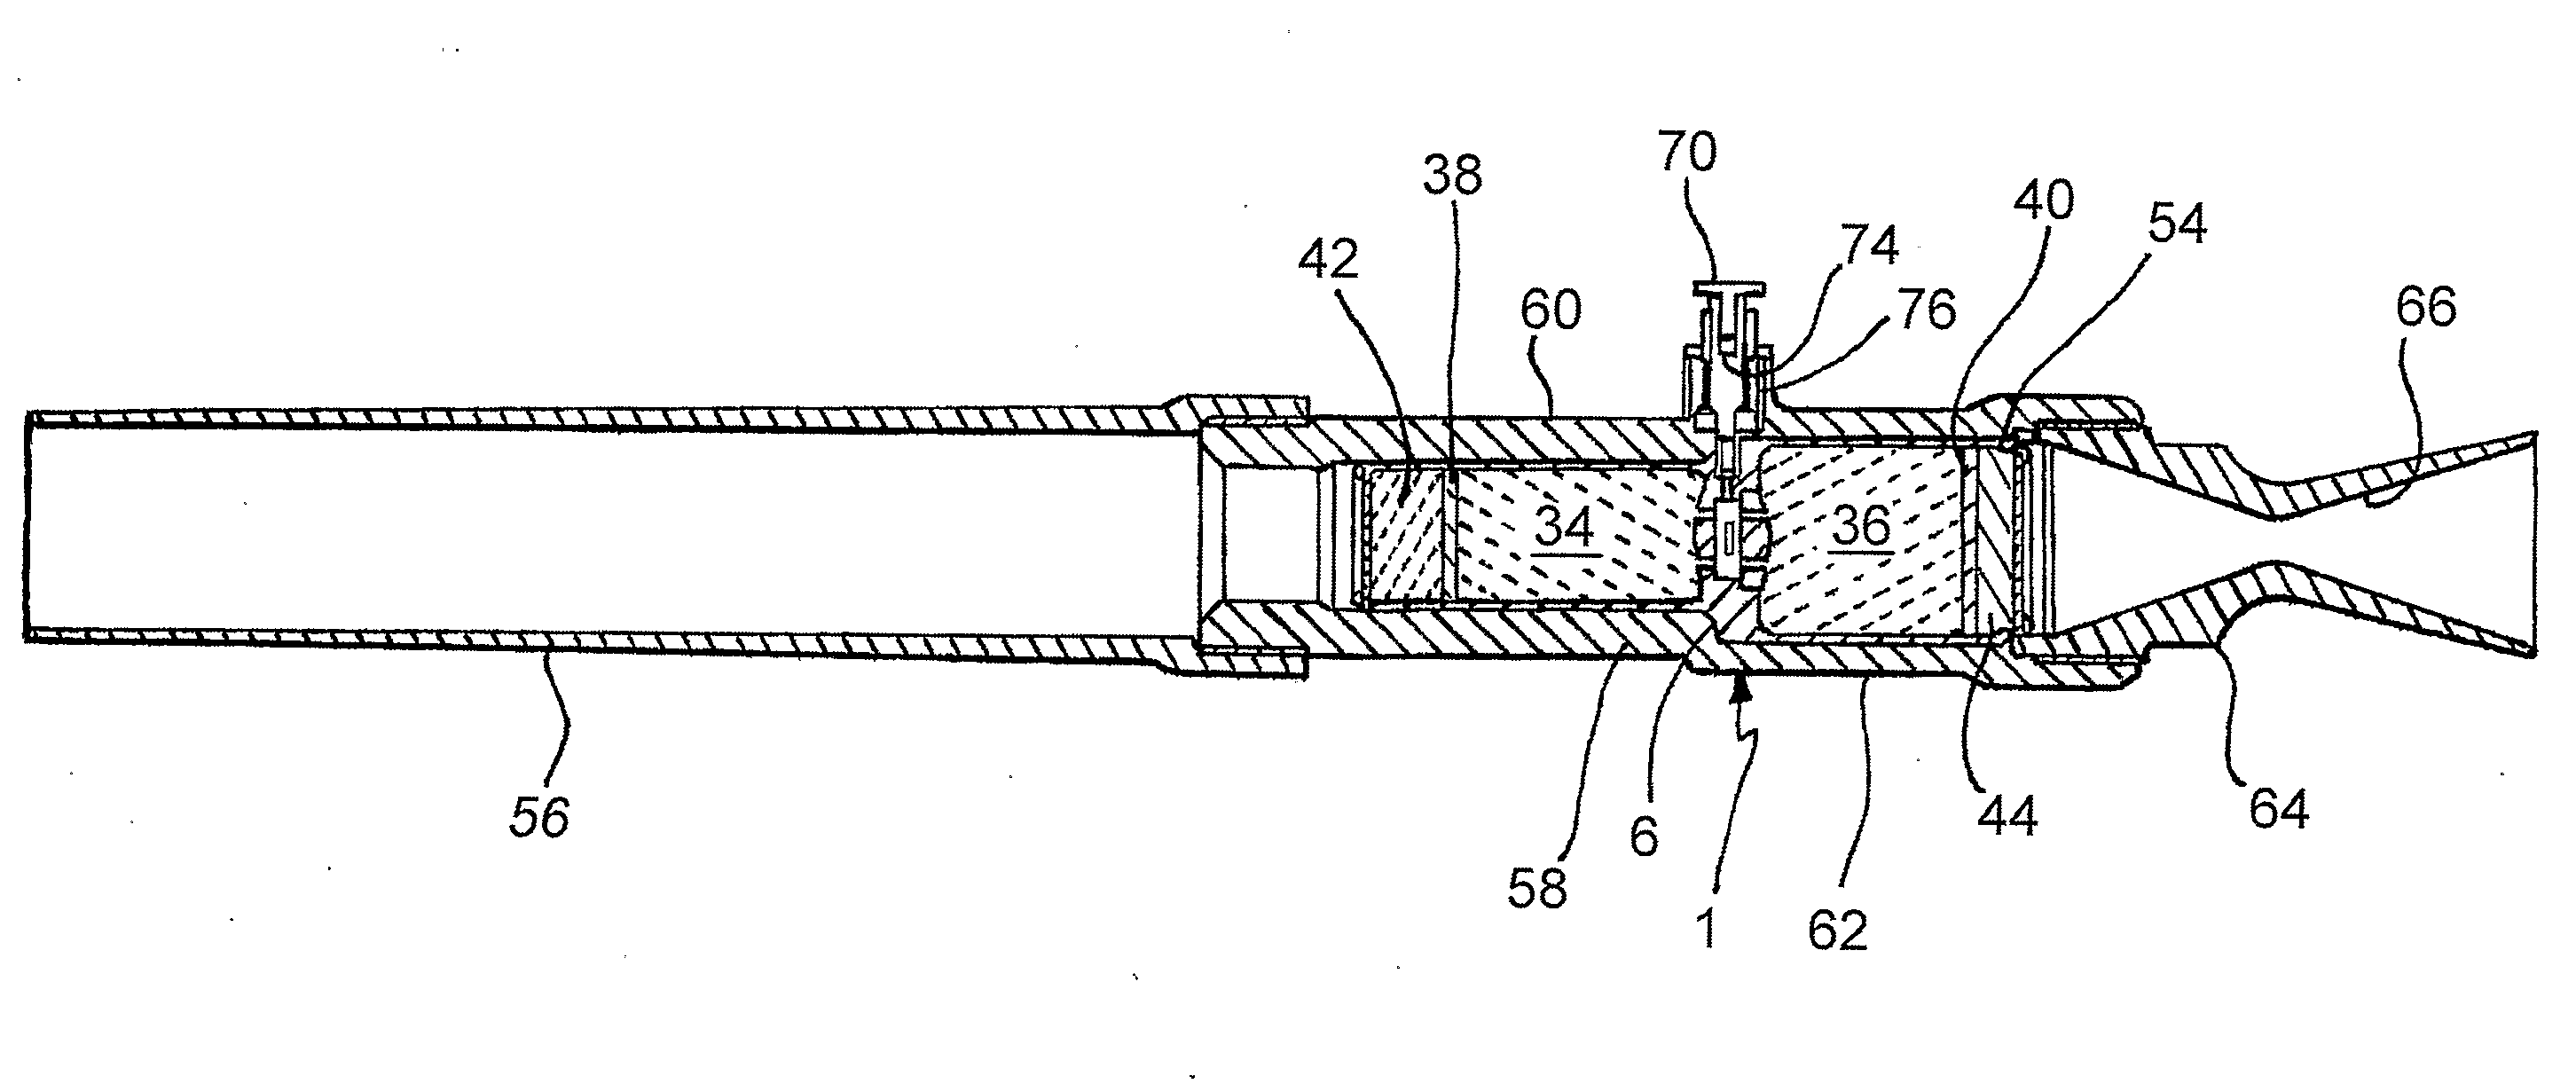 Devices for firing a projectile